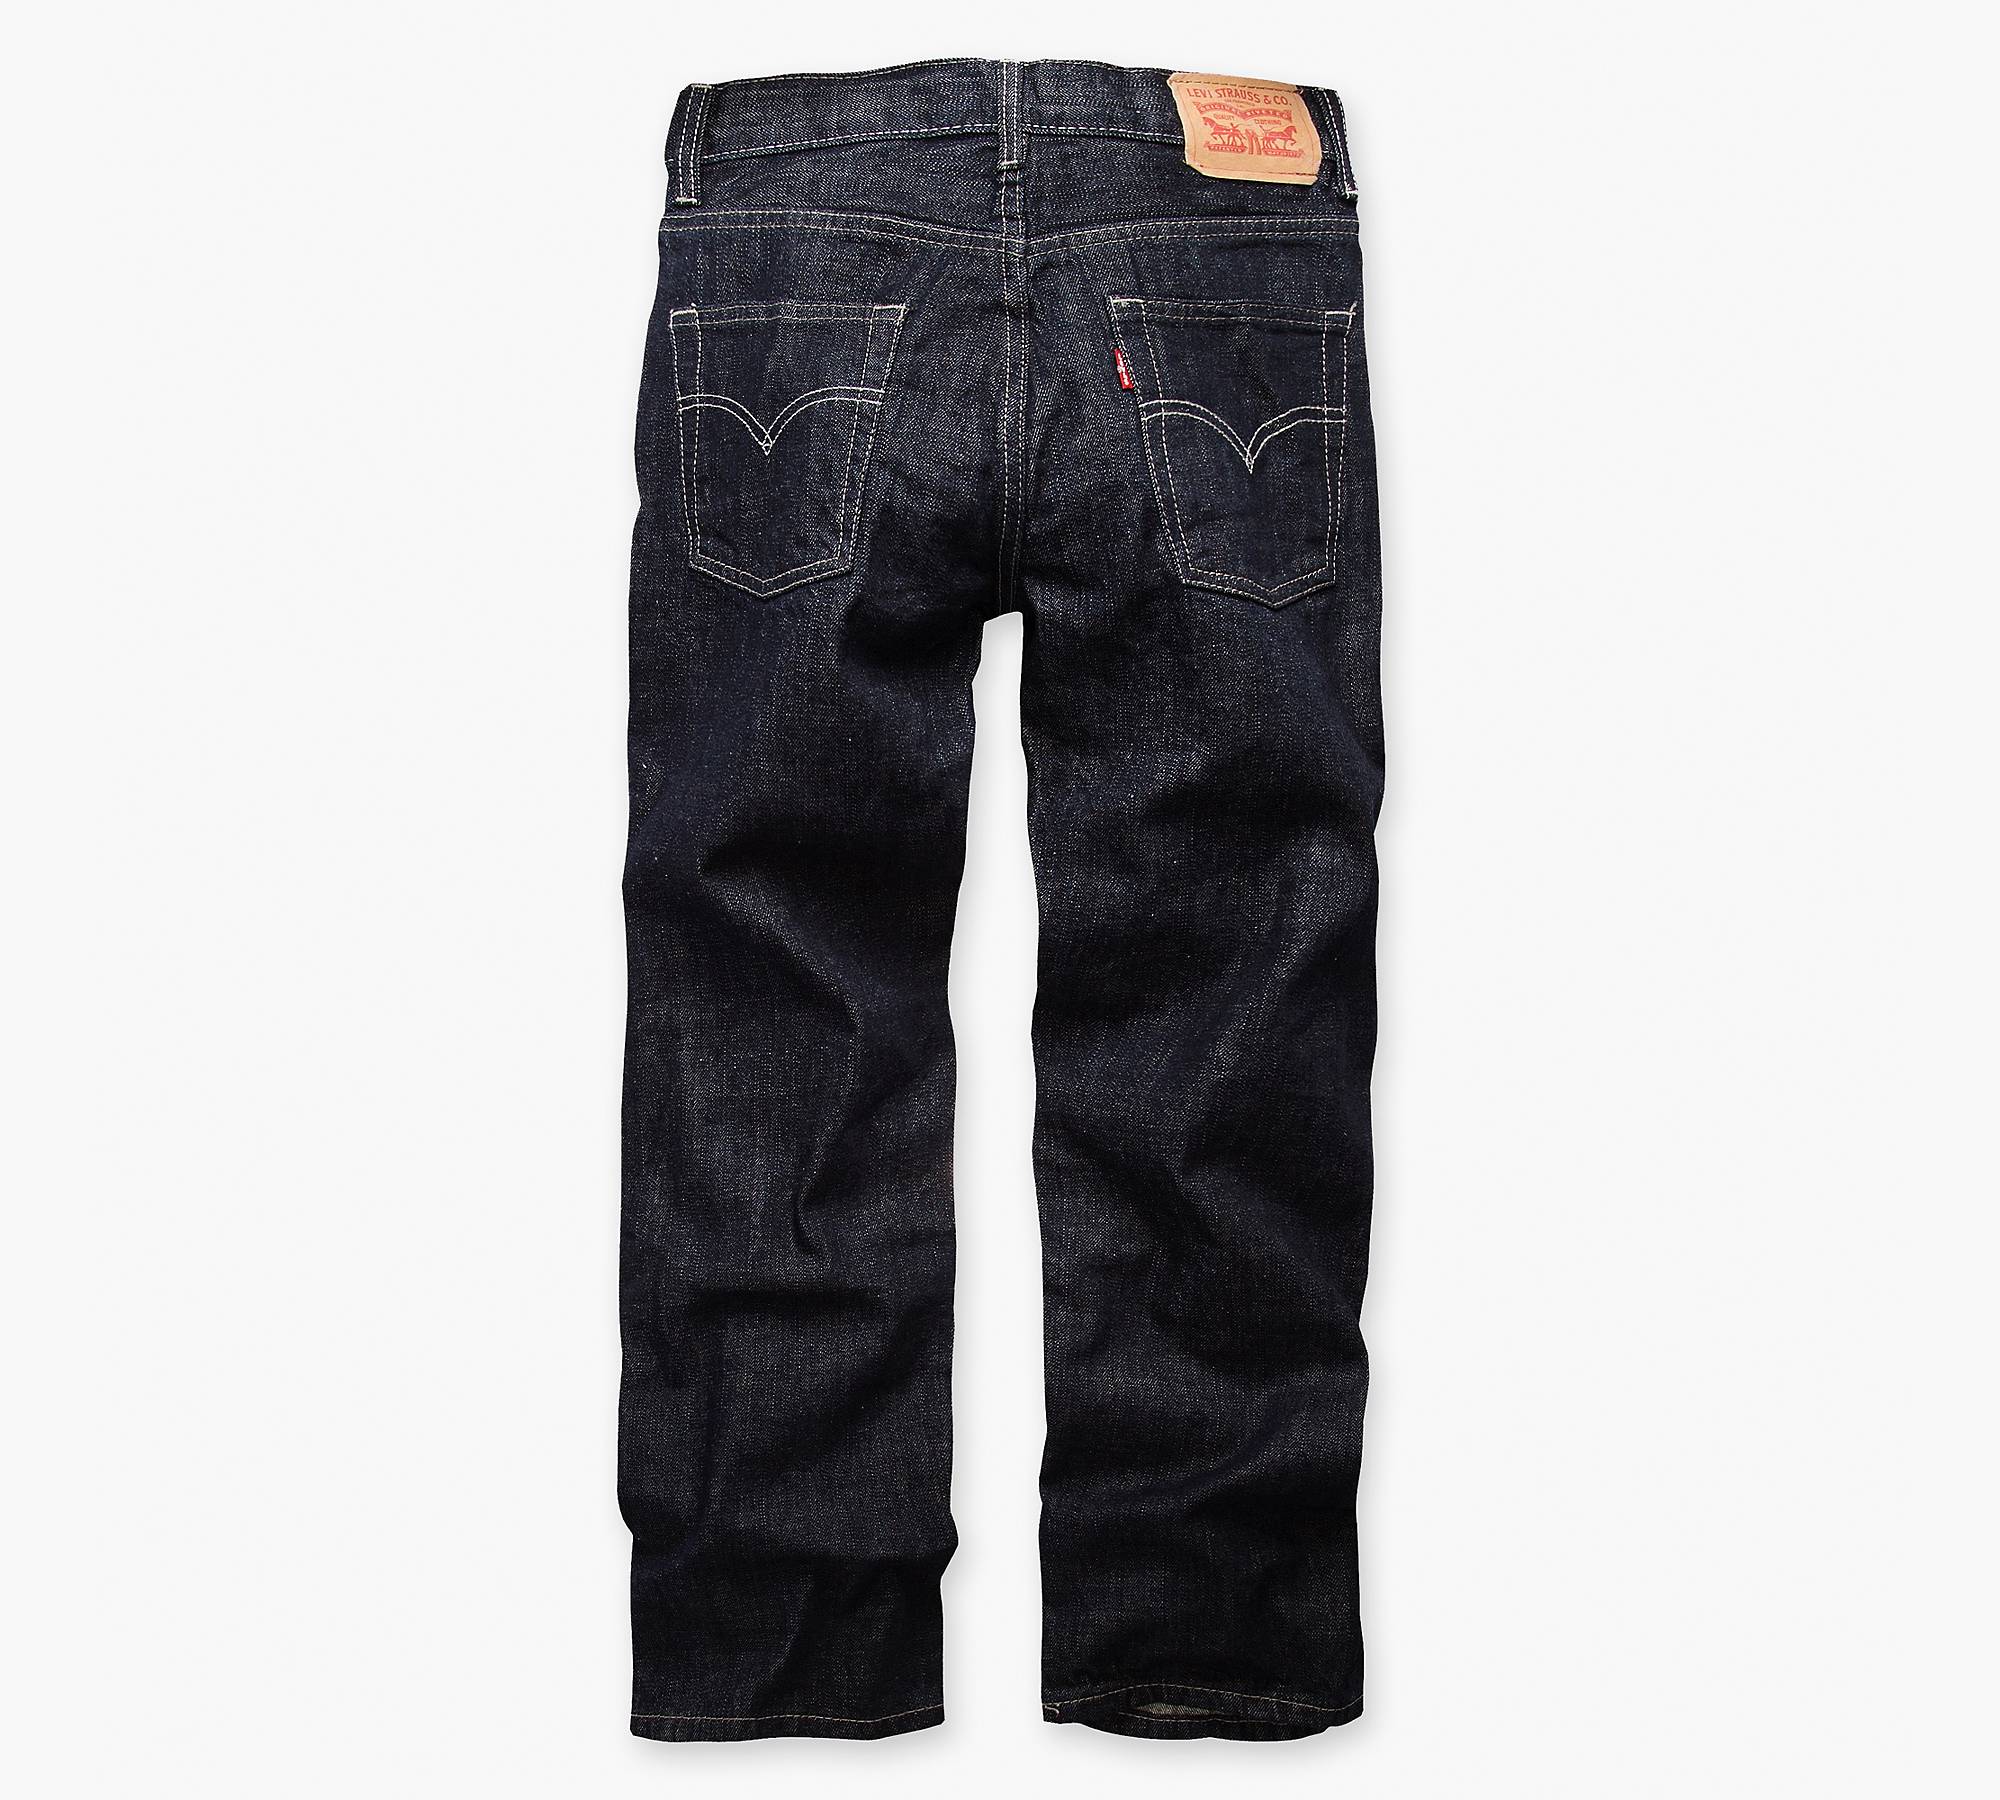 550™ Relaxed Fit Big Boys Jeans 8-20 (husky) - Grey | Levi's® US